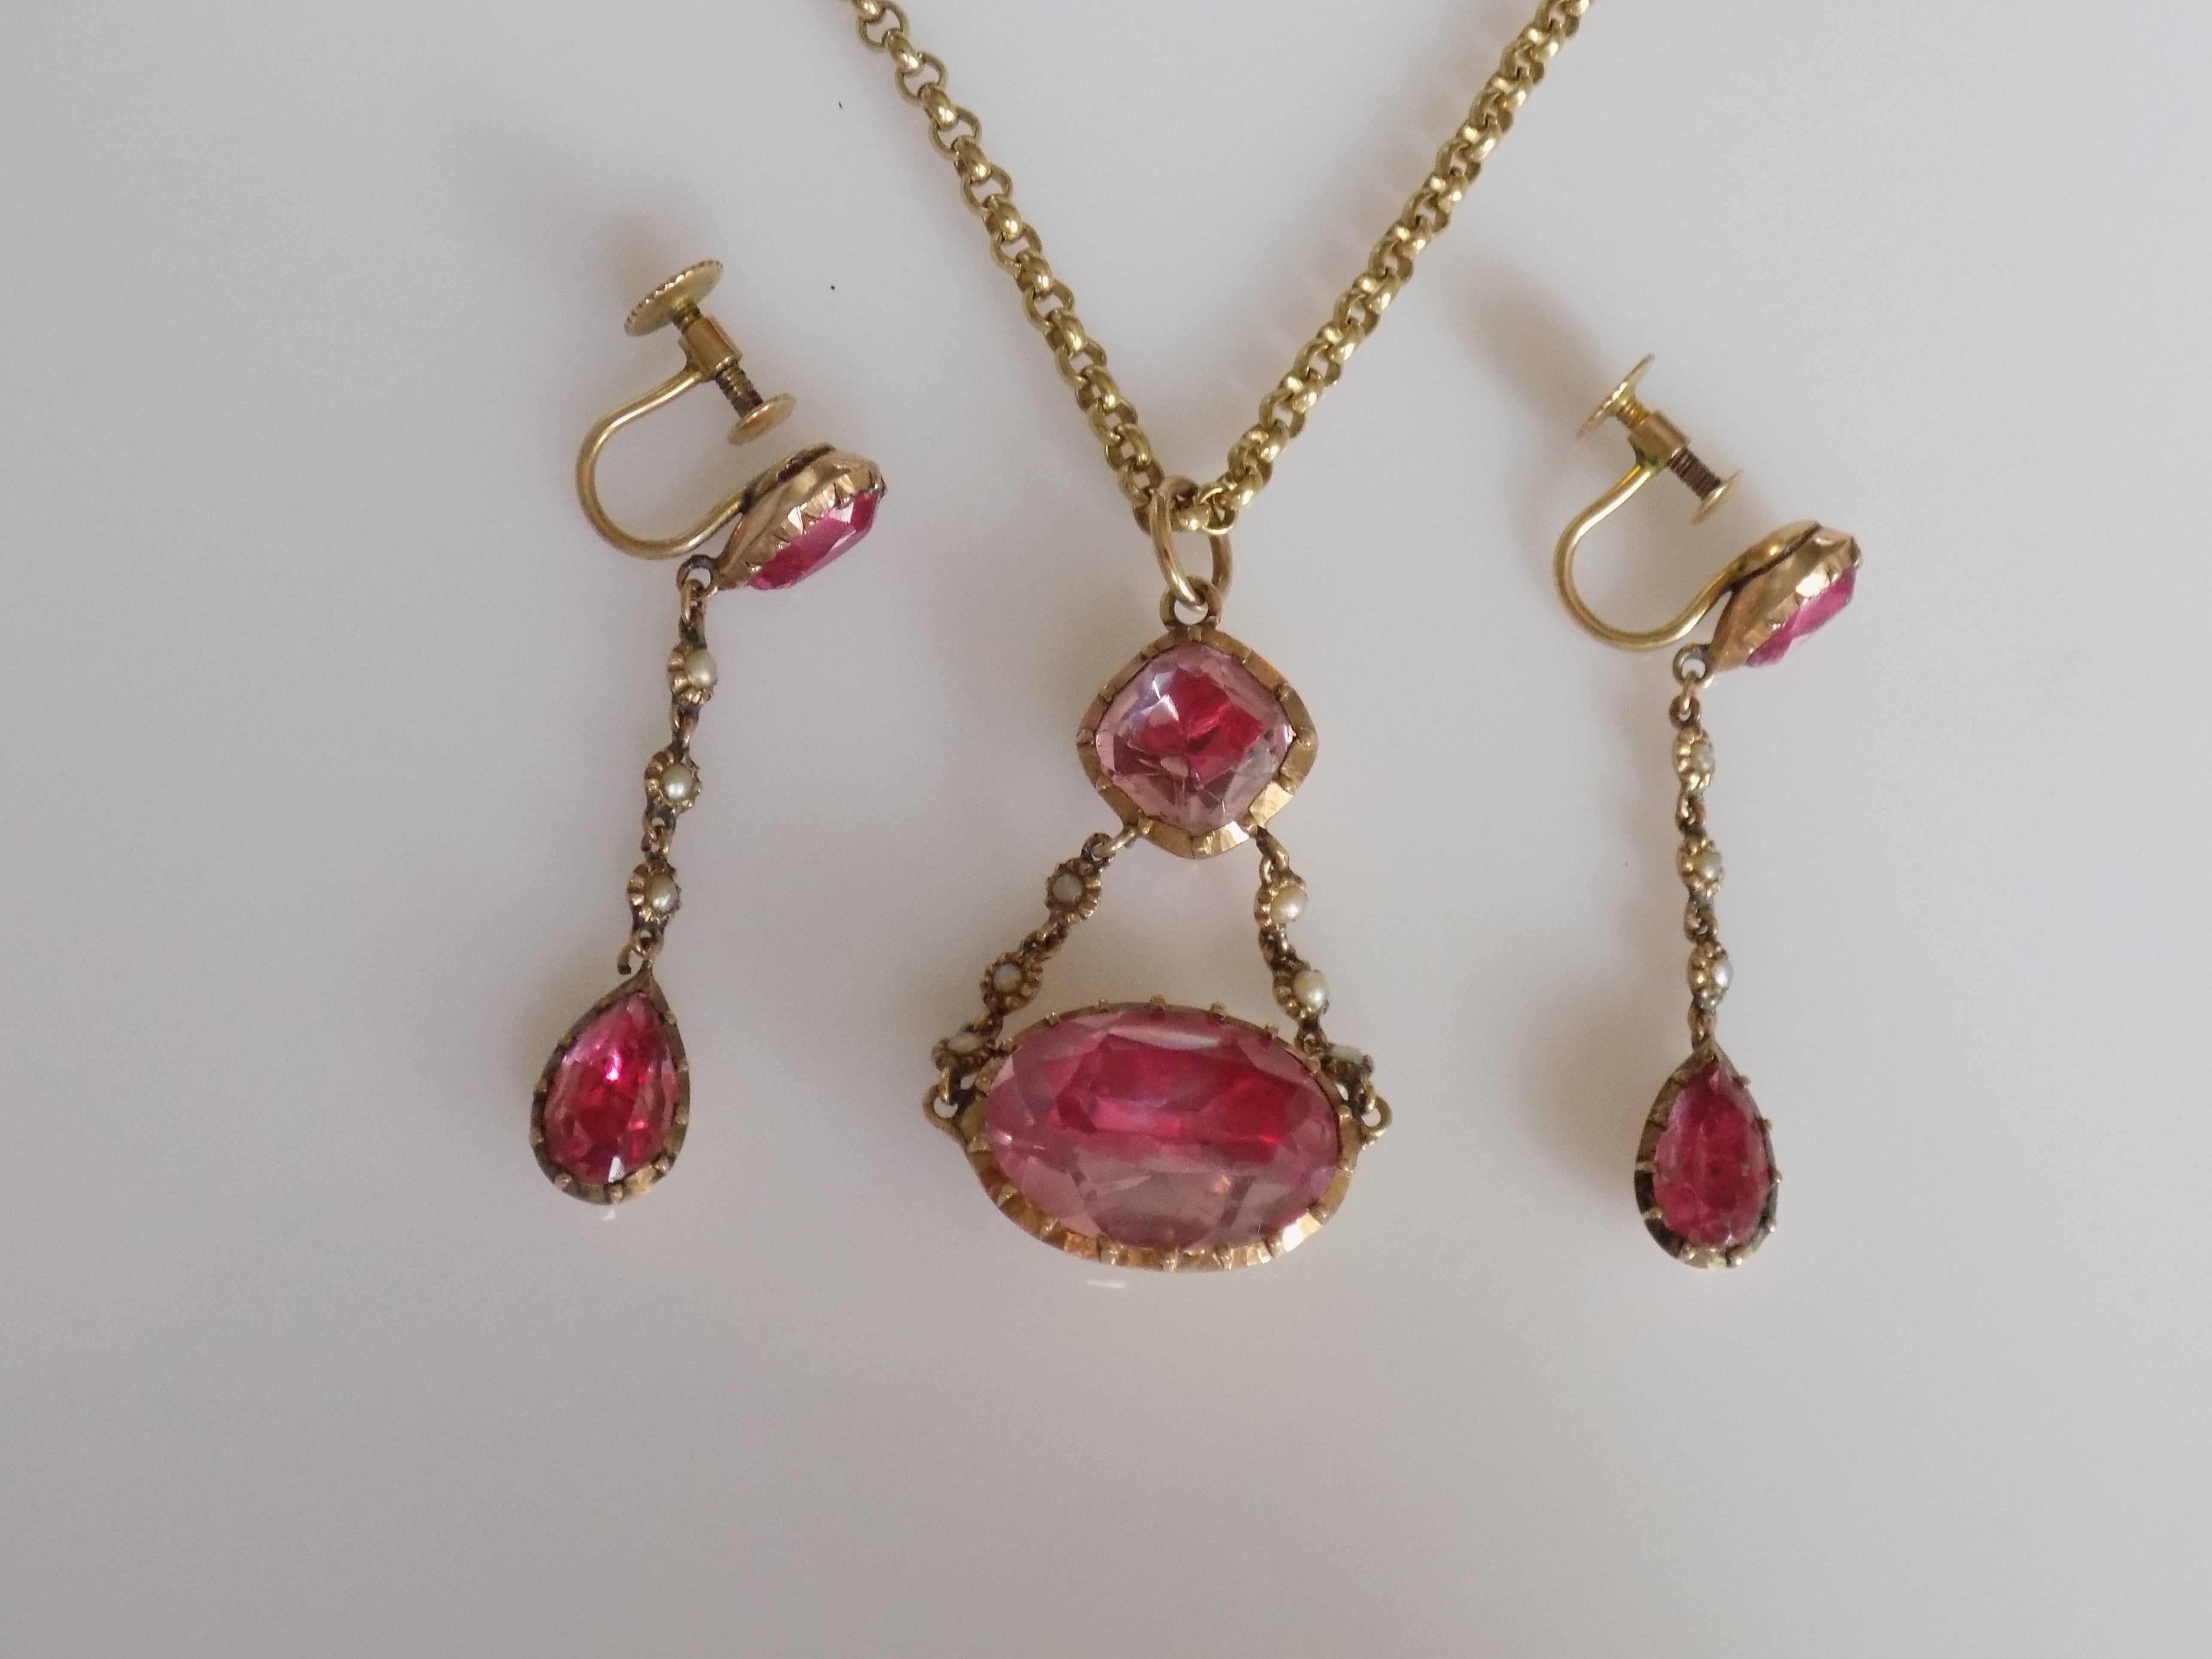 A Gorgeous Georgian c.1830 Pink Topaz paste (glass) and Natural split seed Pearl set . The stones in a foil backed Gold setting. The pendant complete with a modern 9 carat Gold Belcher chain. the earrings complete with a screw back fittings. An